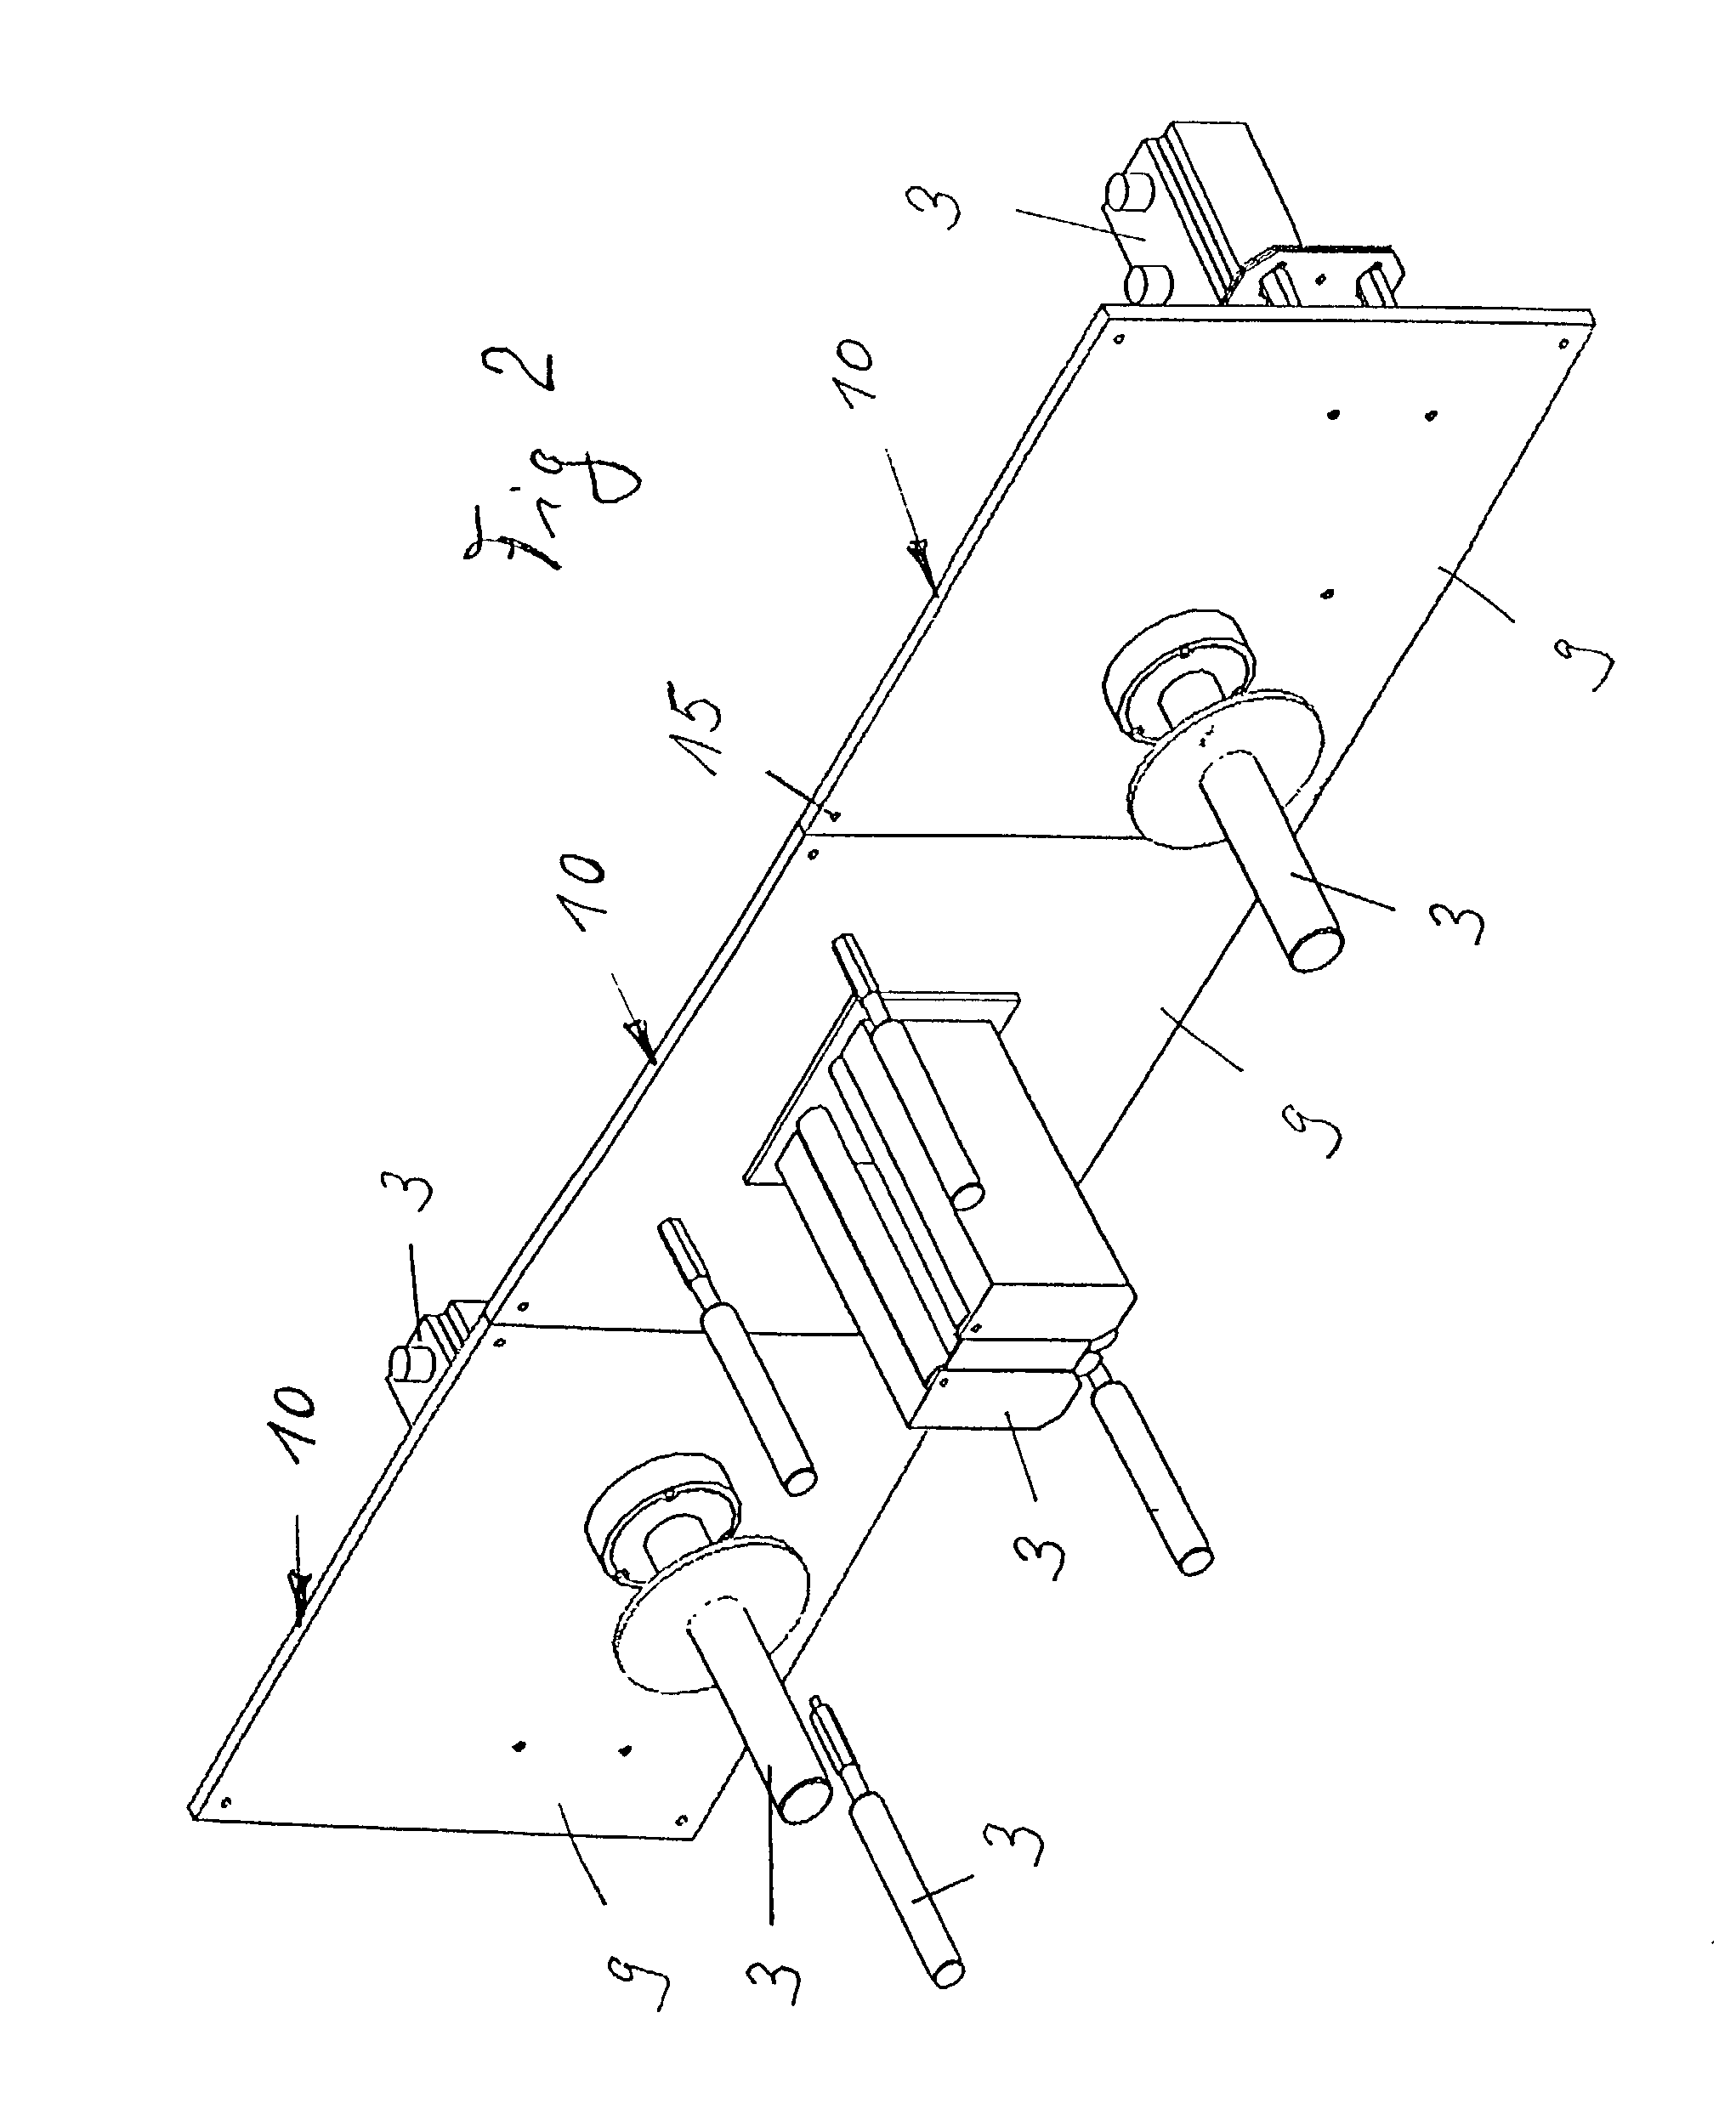 Apparatus for producing hygiene products